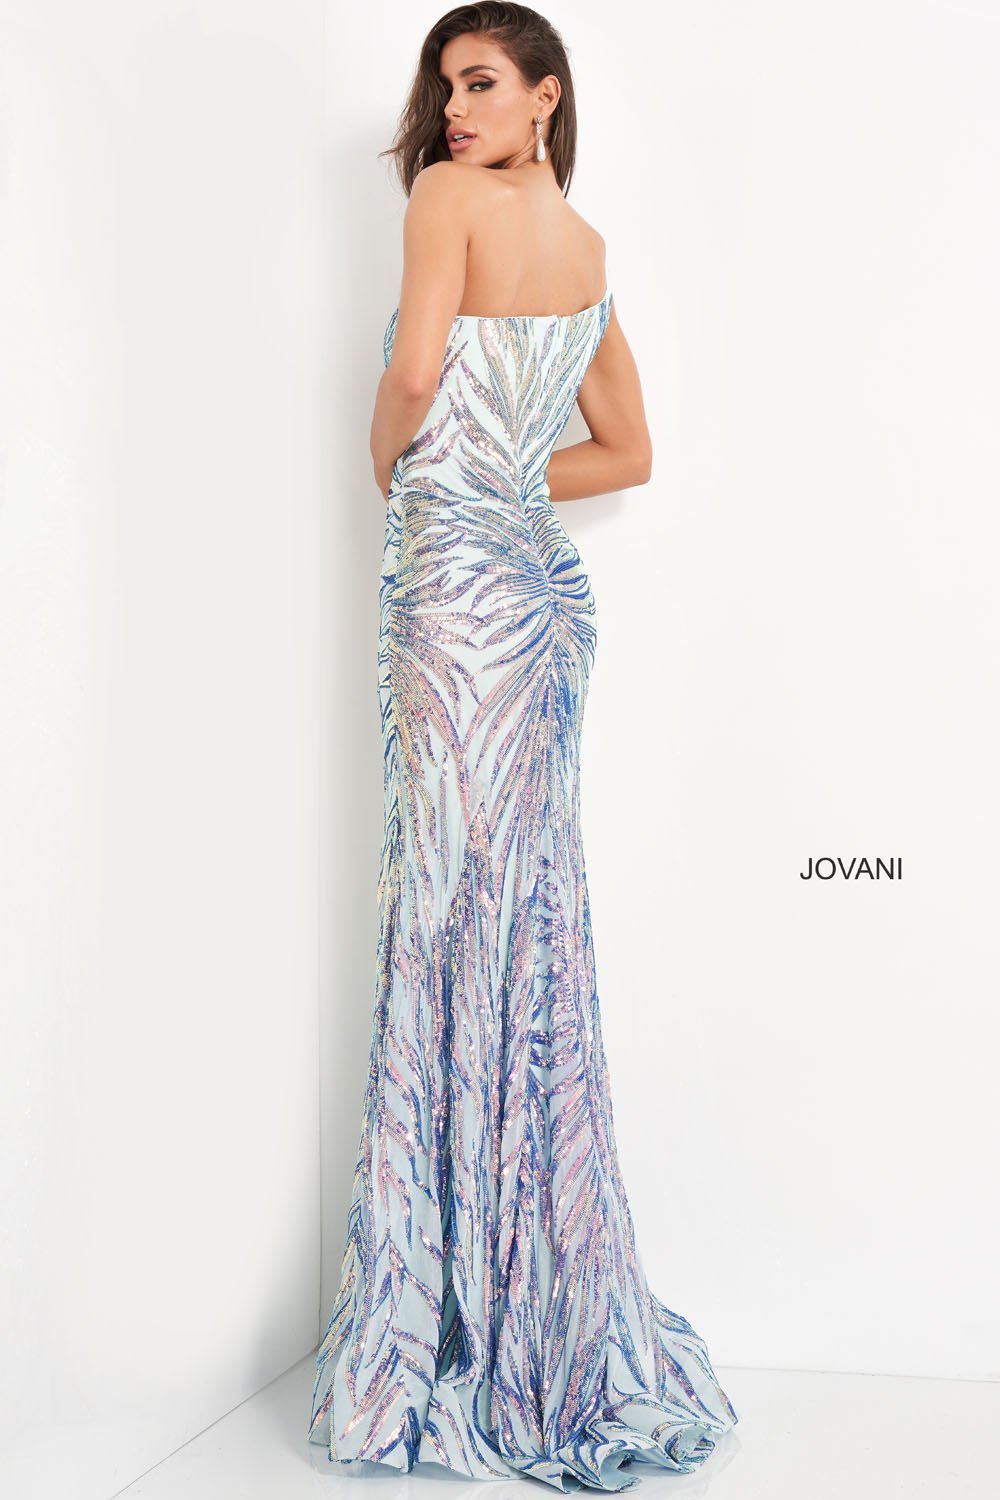 Jovani 05664 dress images in these colors: Mint Multi.